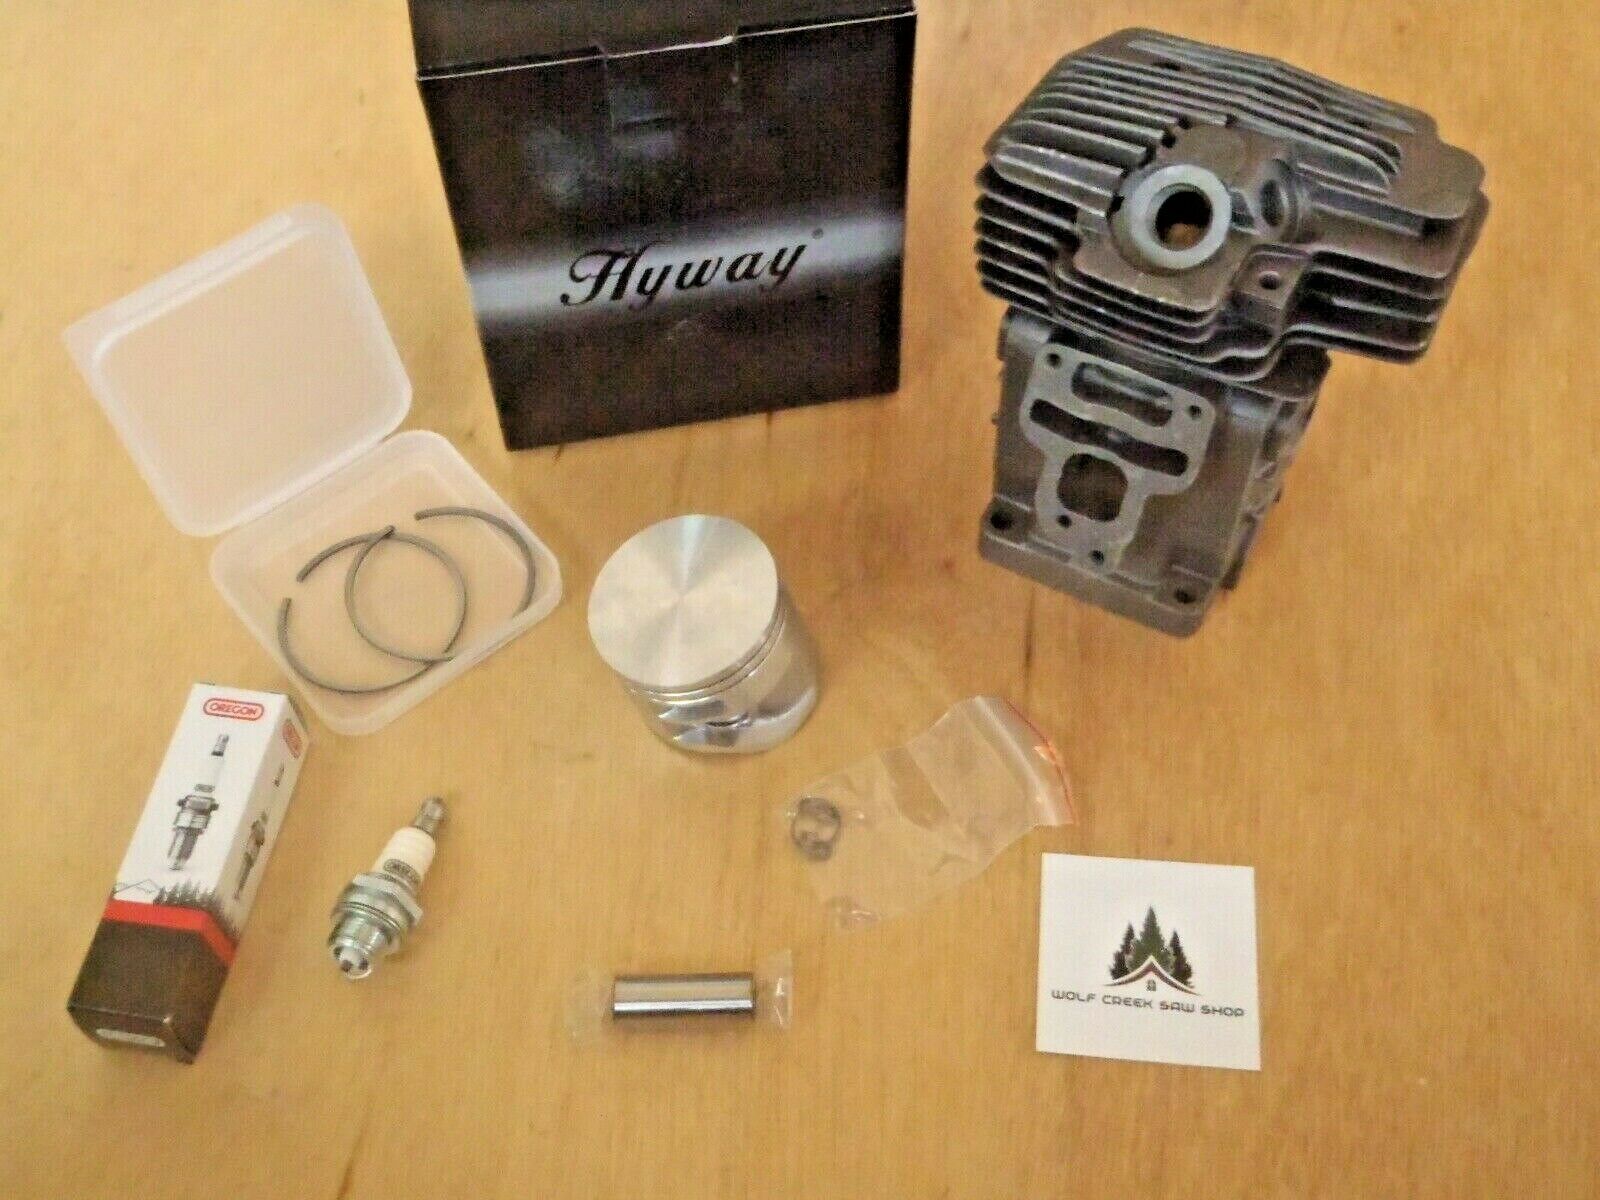 49mm HYWAY CYLINDER & PISTON ASSEMBLY FOR STIHL MS391 CHAINSAWS 1140 020 2004 